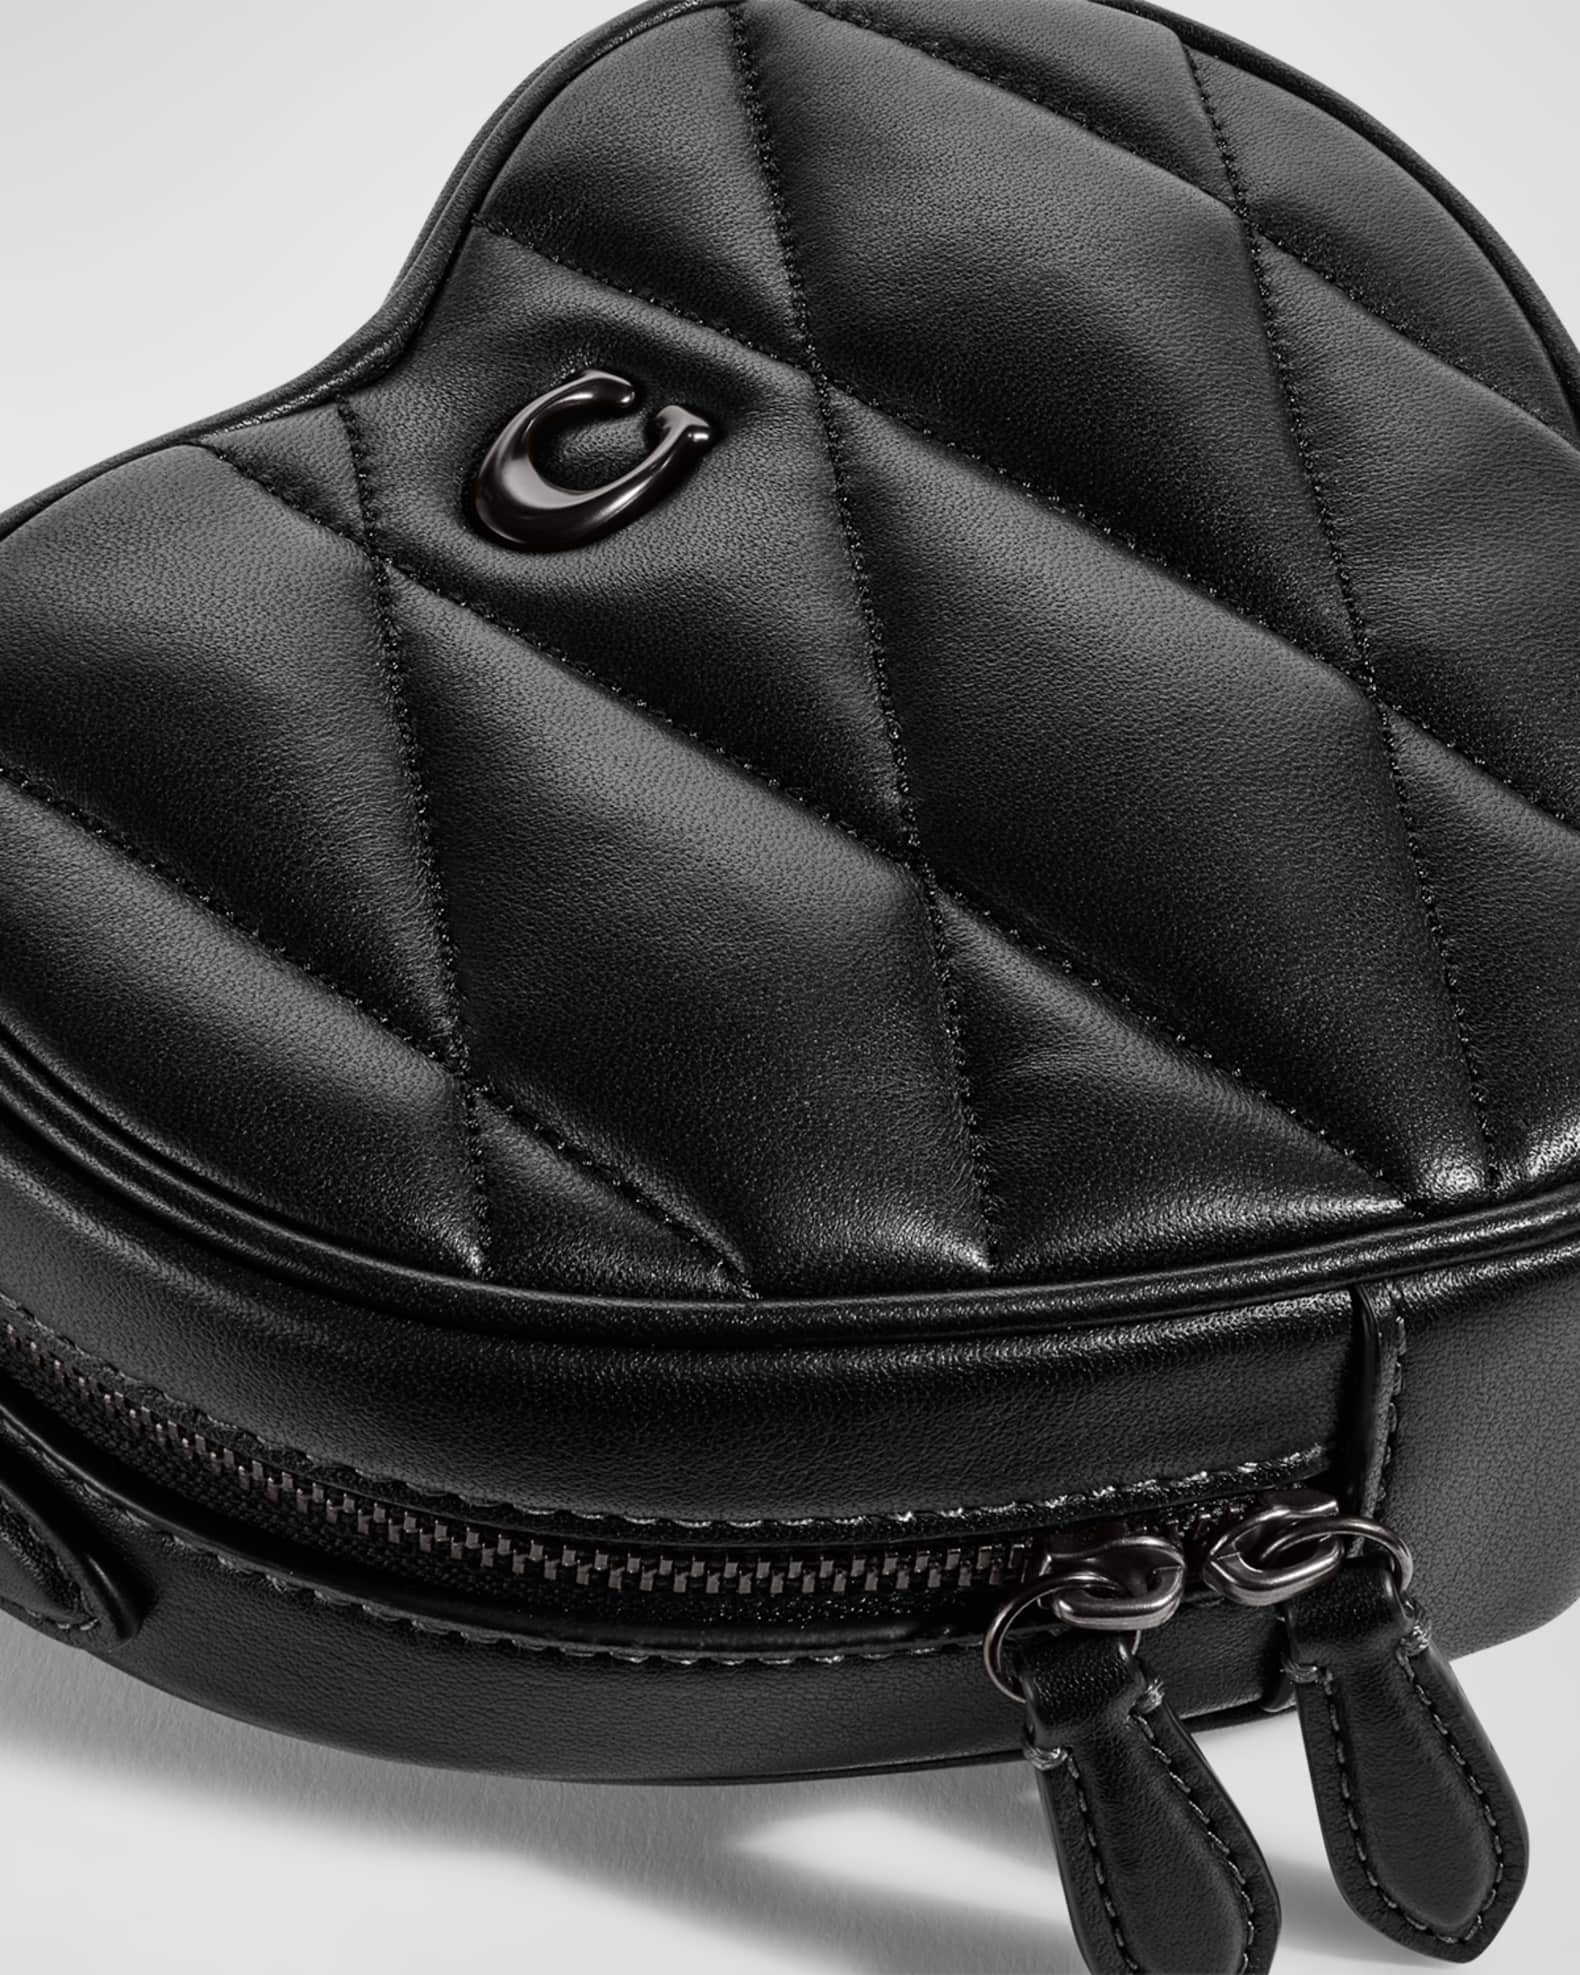 COACH Heart Crossbody In Colorblock 2way Shoulder Bag Quilted Leather Black  New